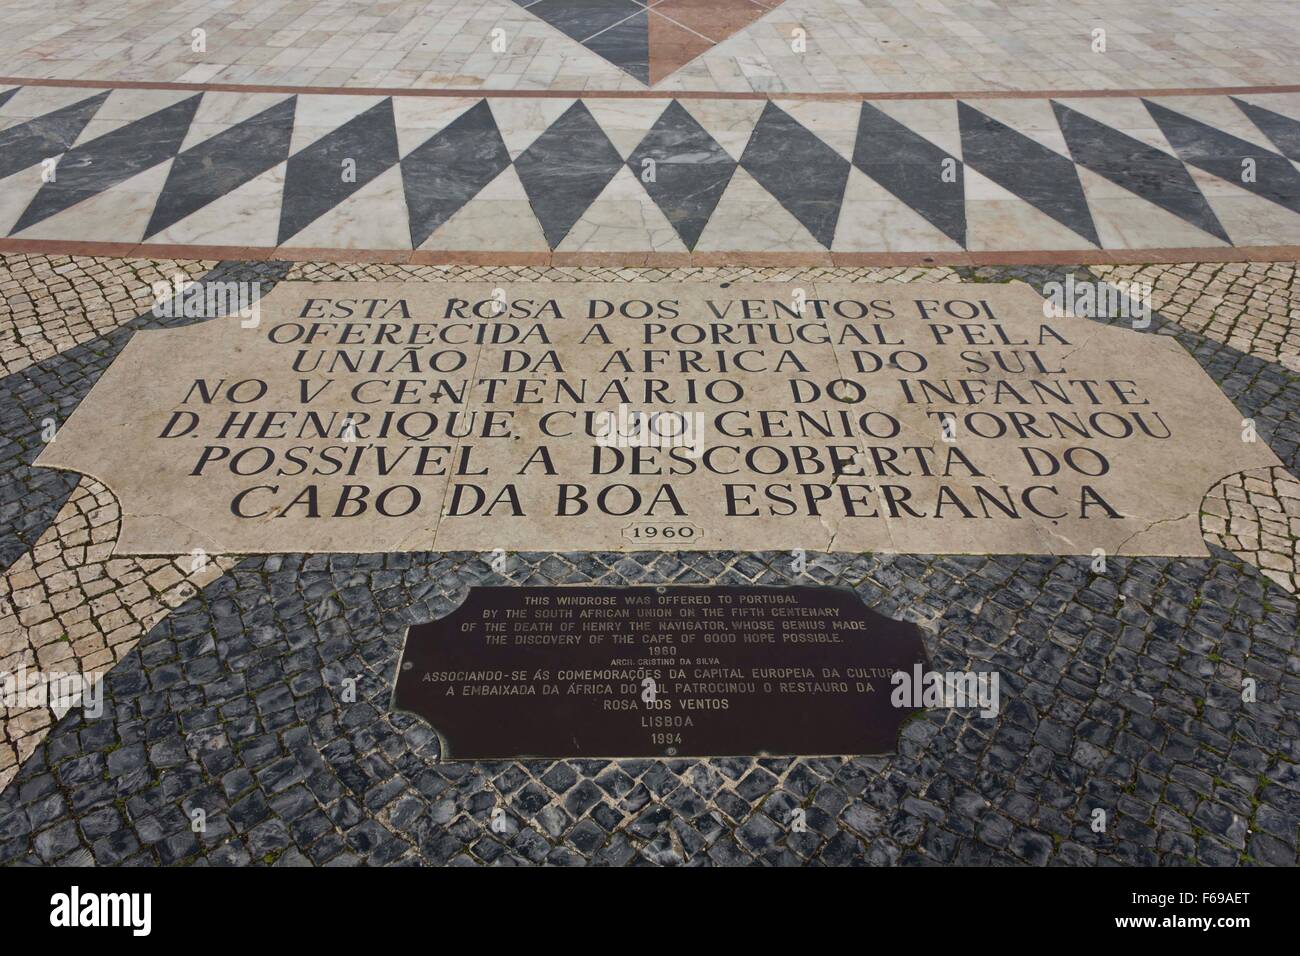 LISBON, PORTUGAL - OCTOBER 24 2014: Close up of the texts of the Compass Rose Mosaic in Lisbon, Portugal Stock Photo